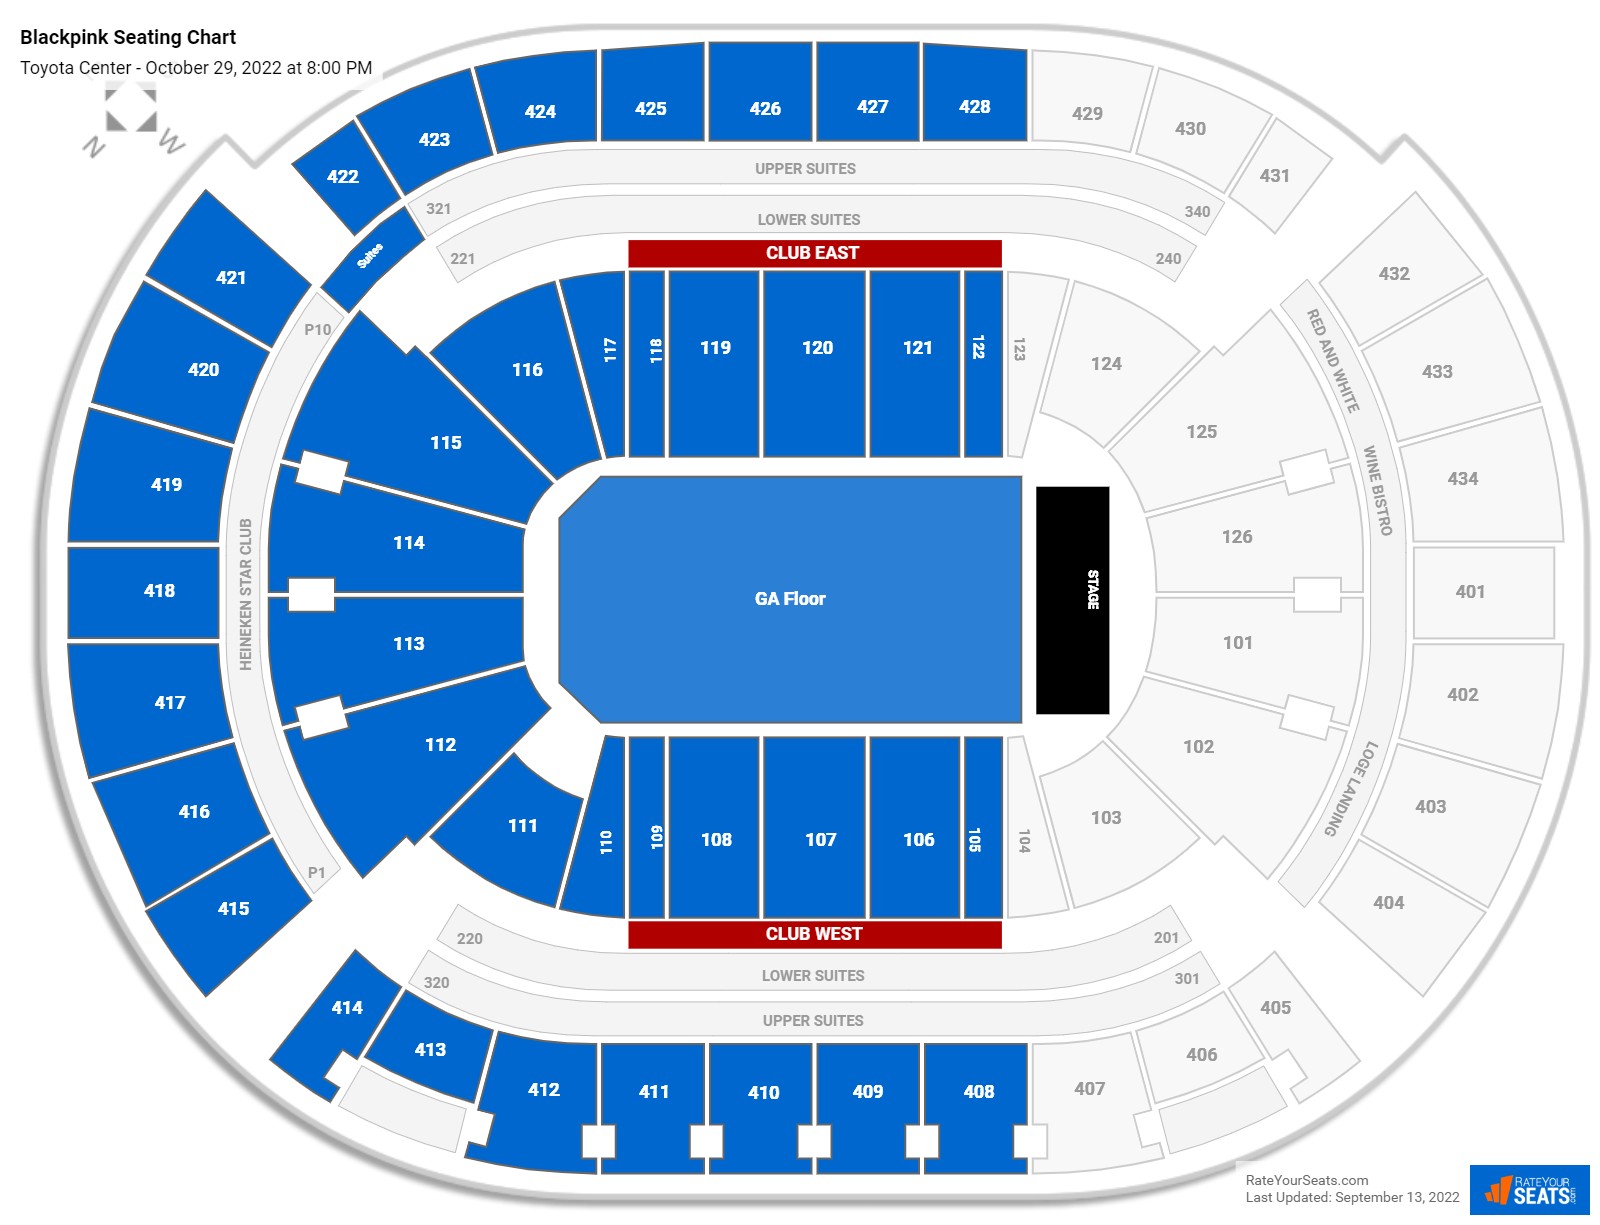 Toyota Center Concert Seating Chart - RateYourSeats.com